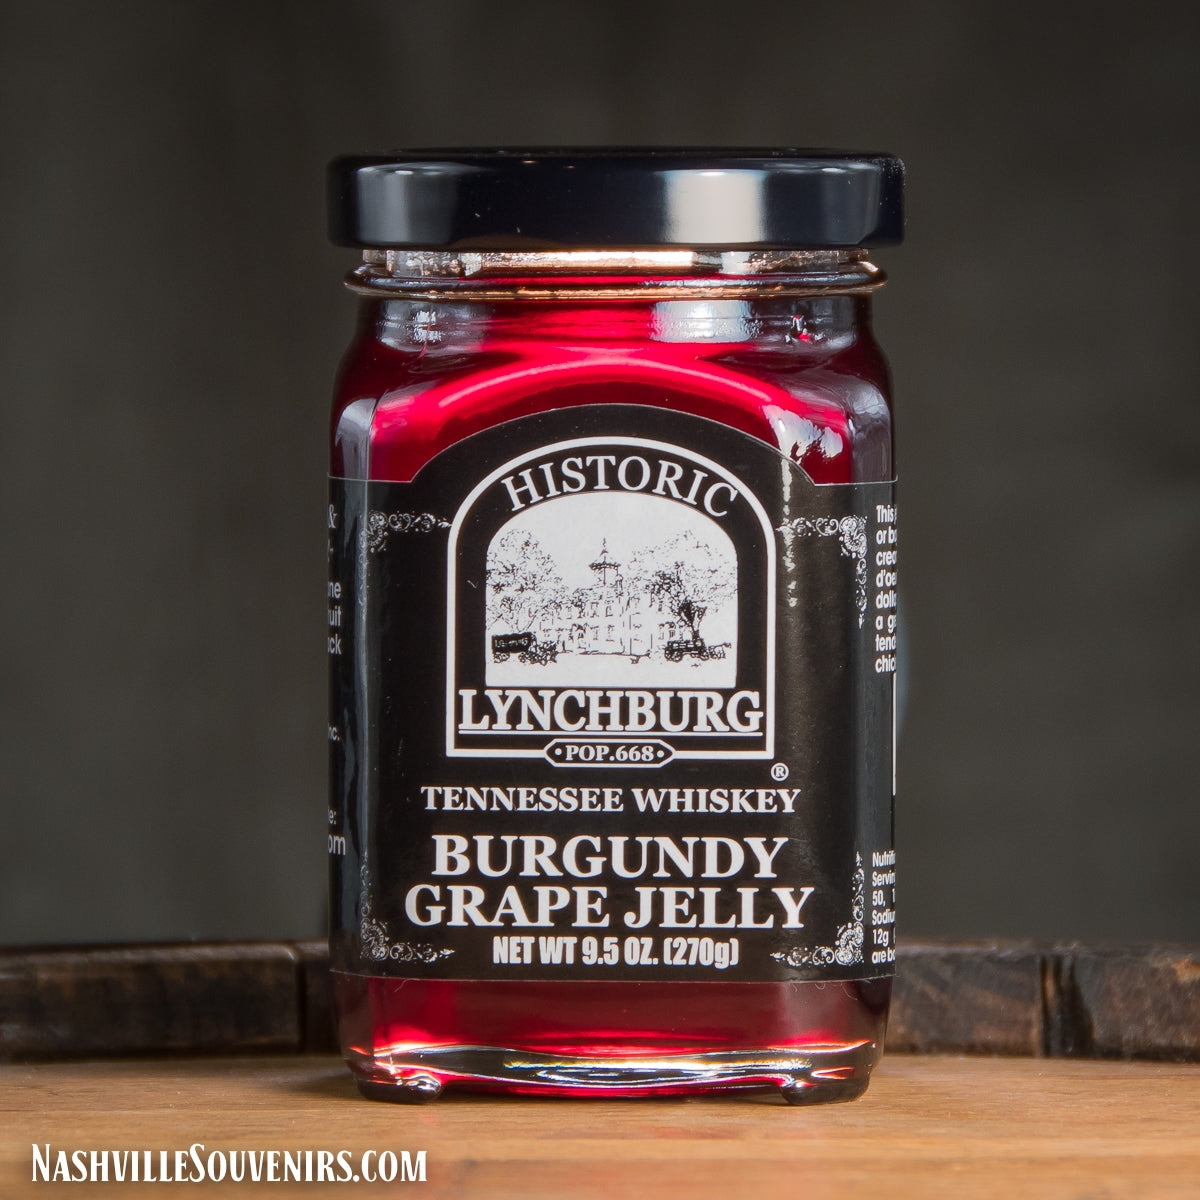 Historic Lynchburg Burgundy Grape Jelly and a touch of real Jack Daniels Whiskey make a great Tennessee treat! FREE SHIPPING on all US orders over $75!